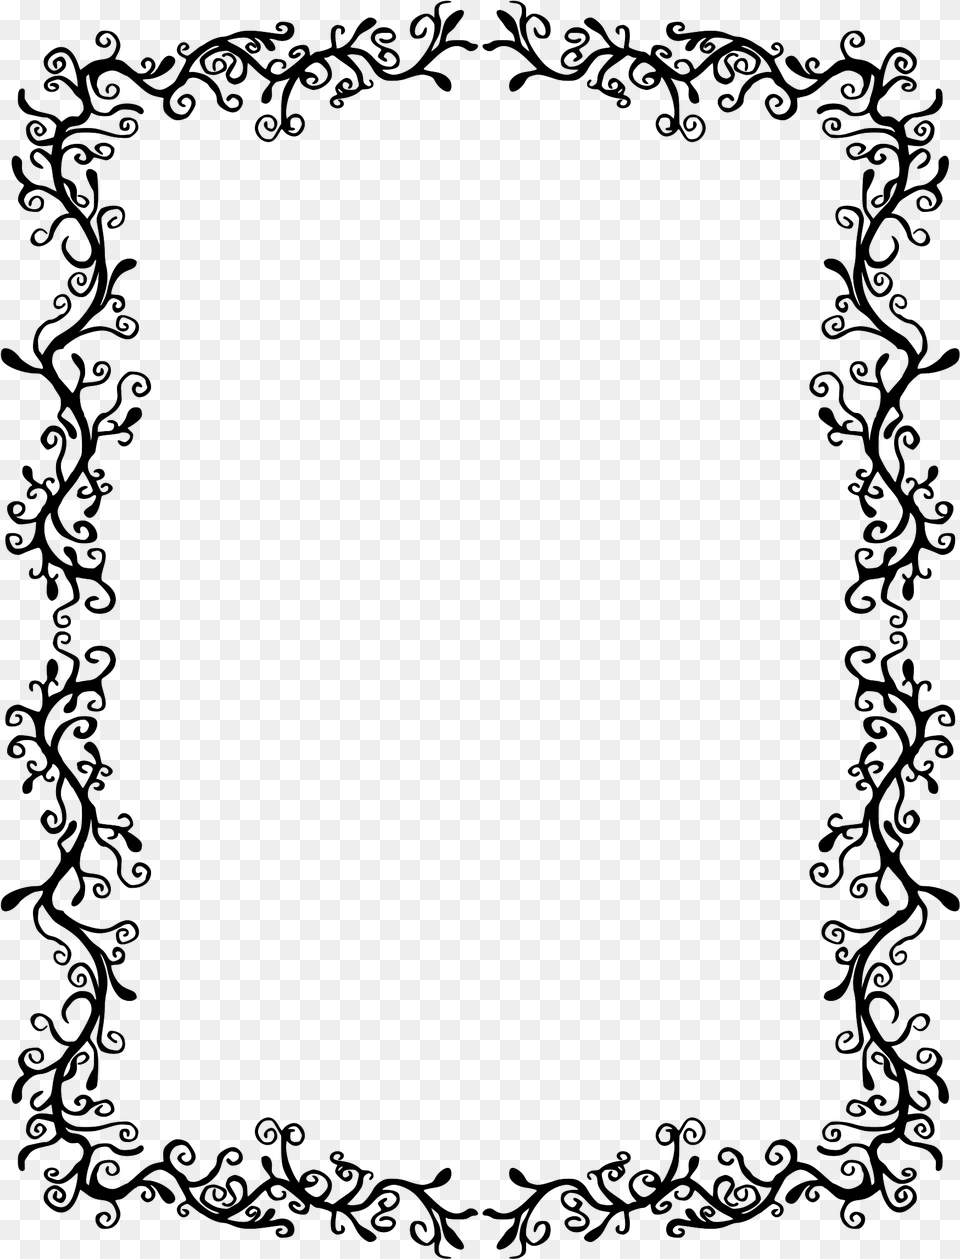 Flourish Border Fall Leaves Border Black And White, Gray Free Png Download